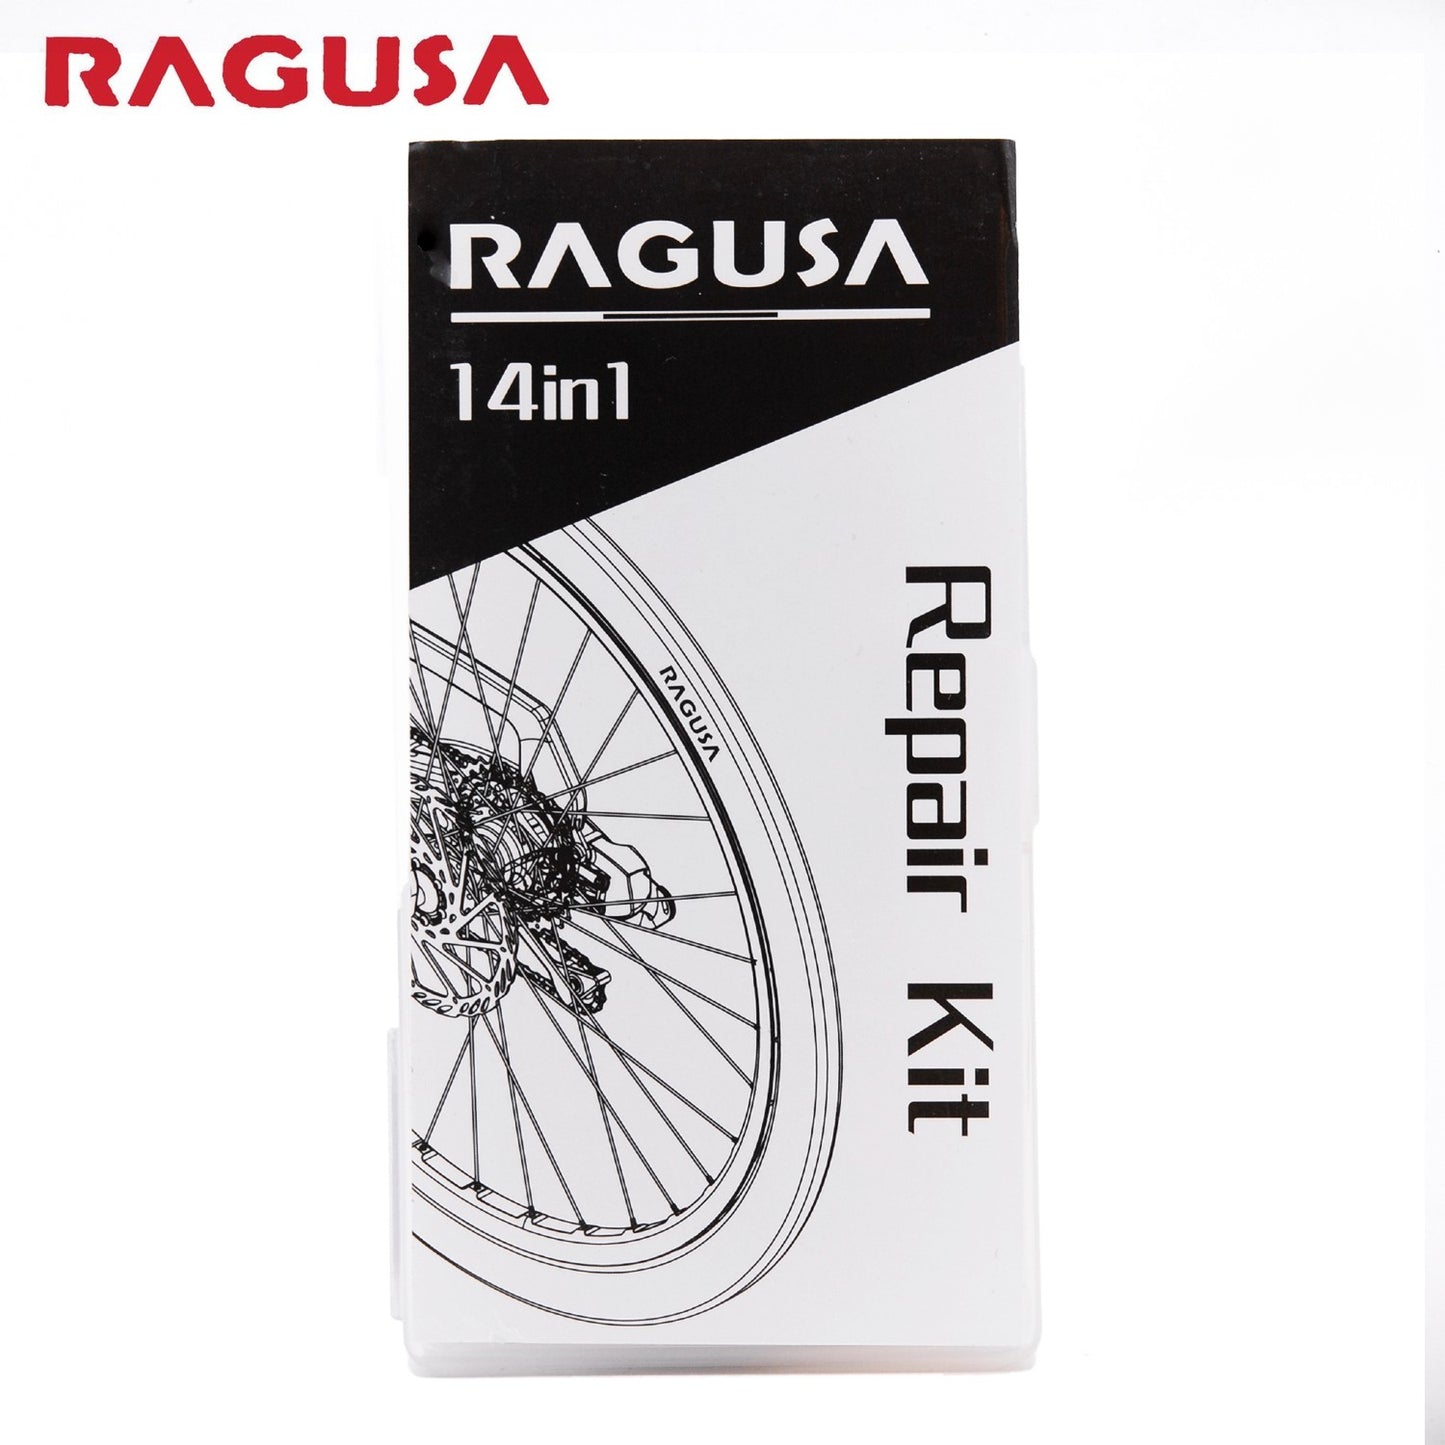 Ragusa 14-in-1 Patch Kit